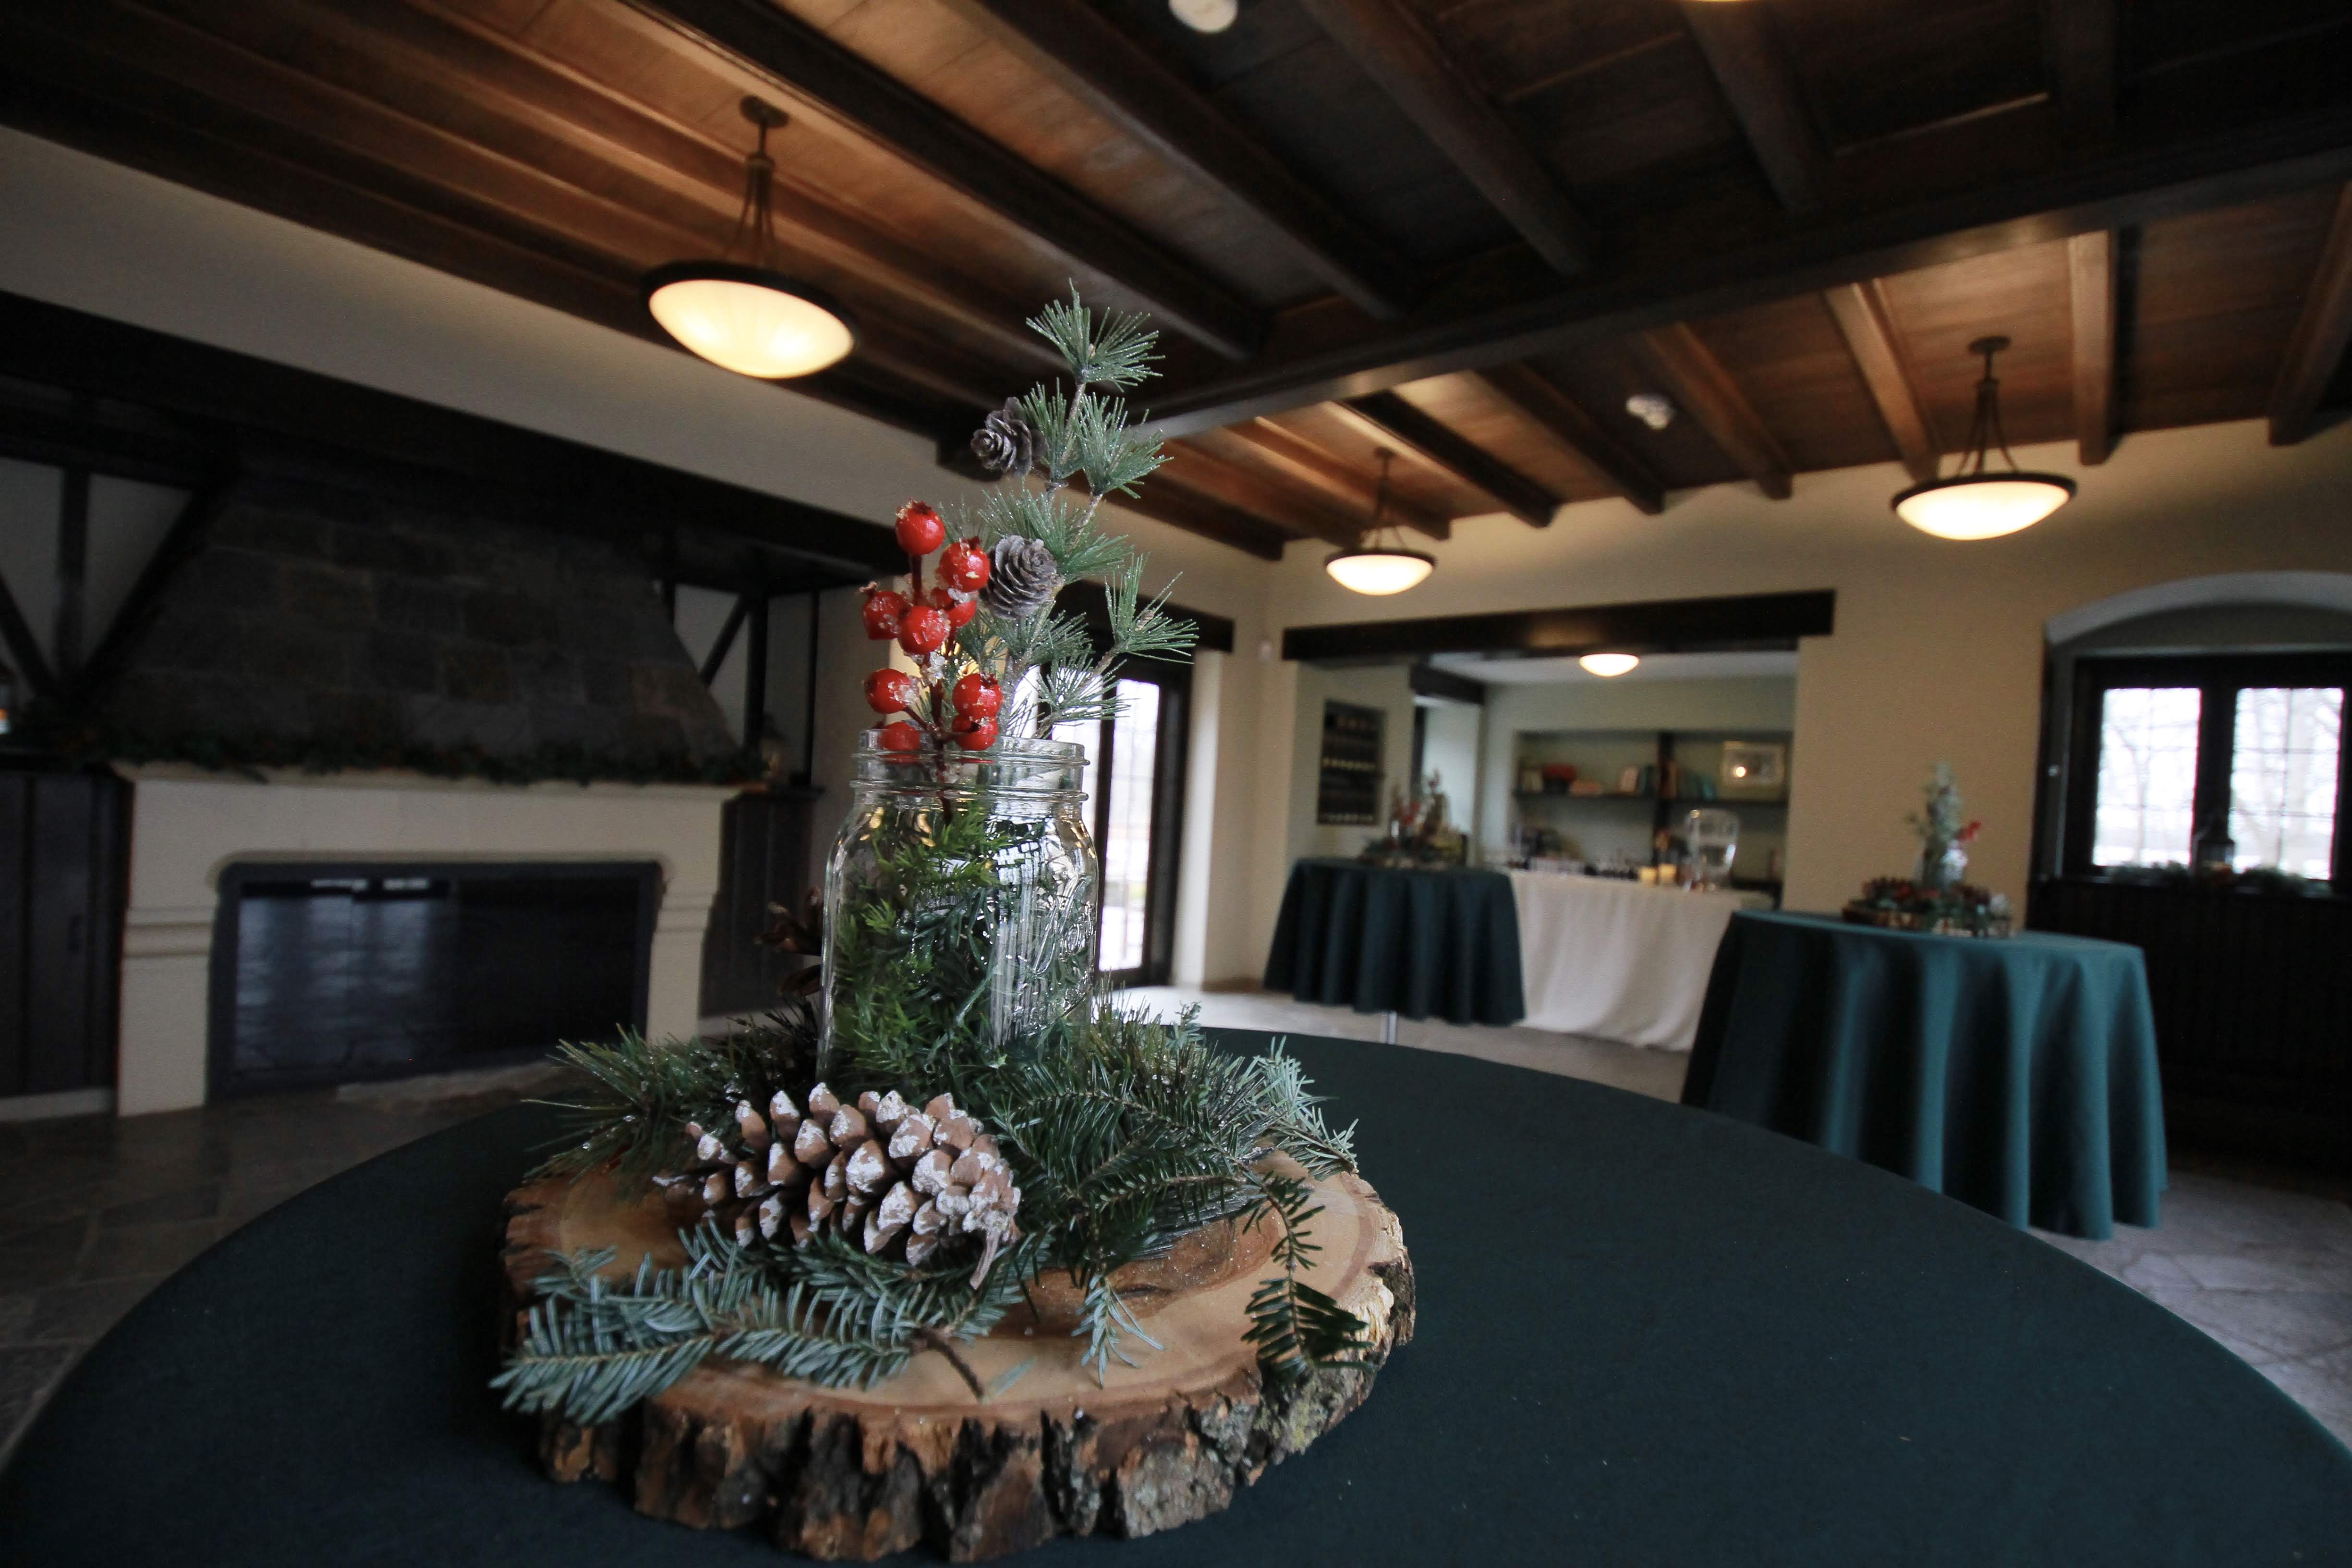  A photo of the inside of Groesbeck Estate staged for an event